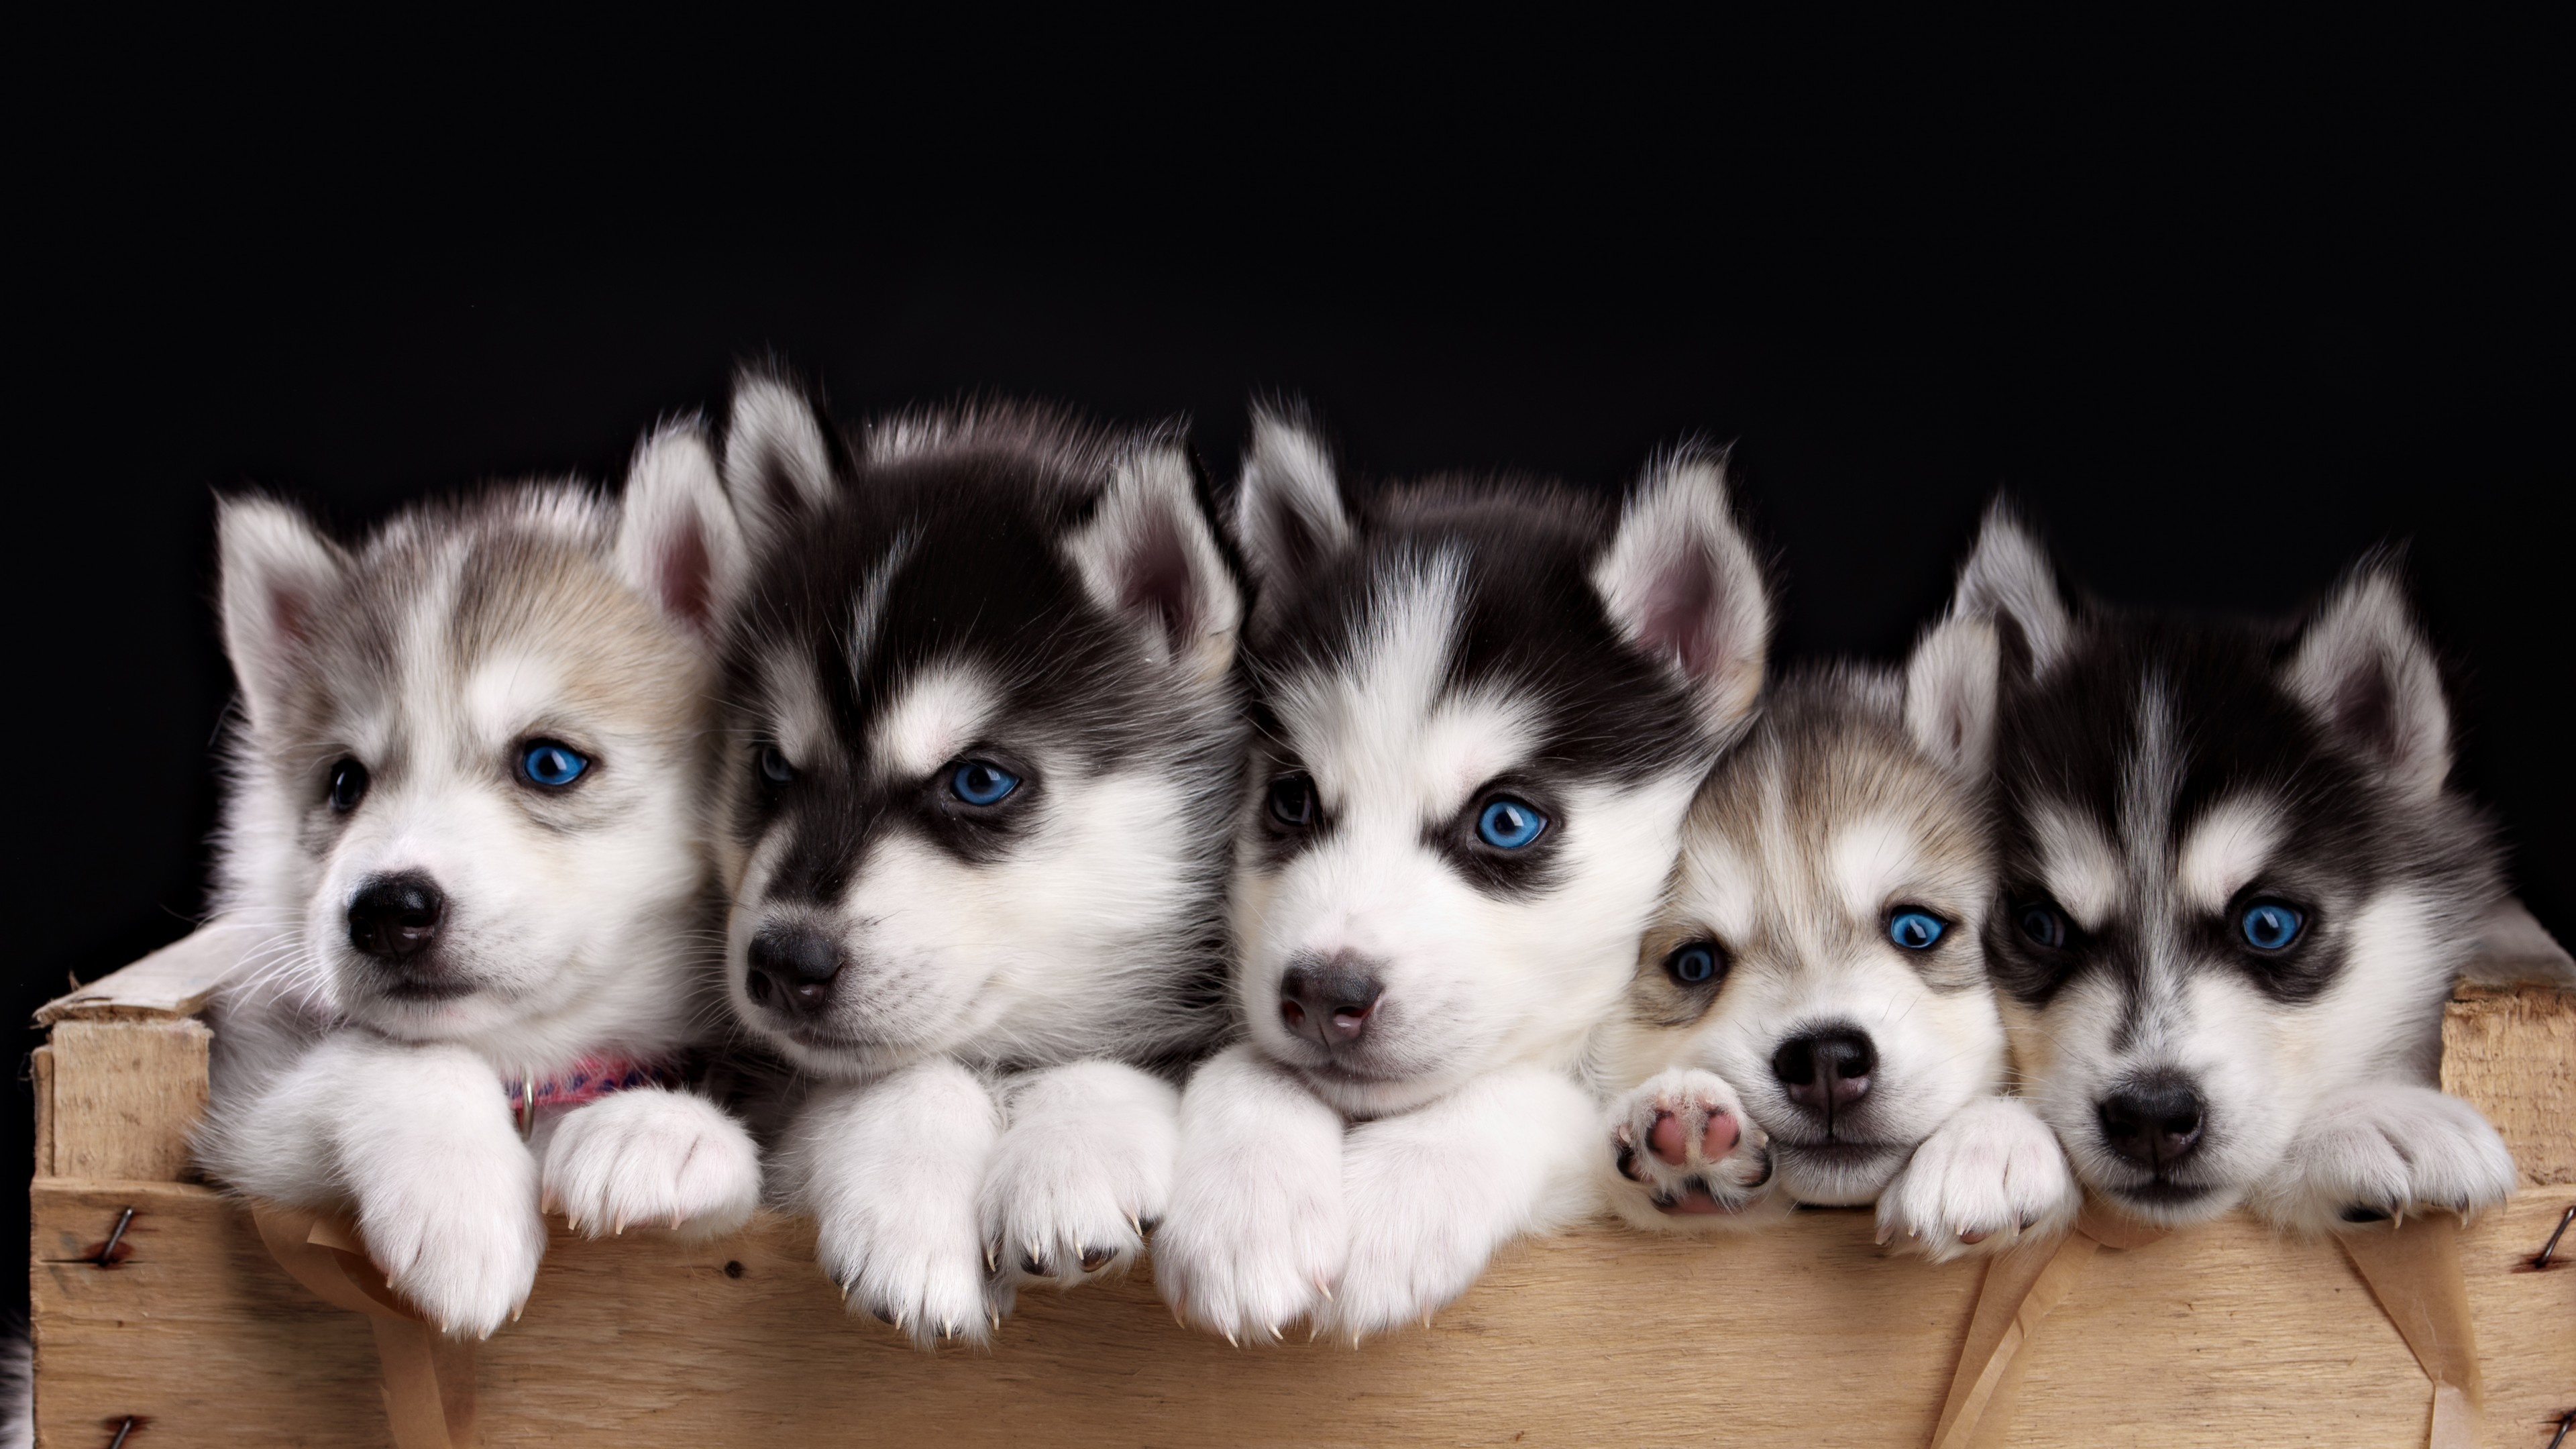 Cute husky wallpapers, Michelle Thompson's collection, Playful expressions, Irresistible charm, 3840x2160 4K Desktop